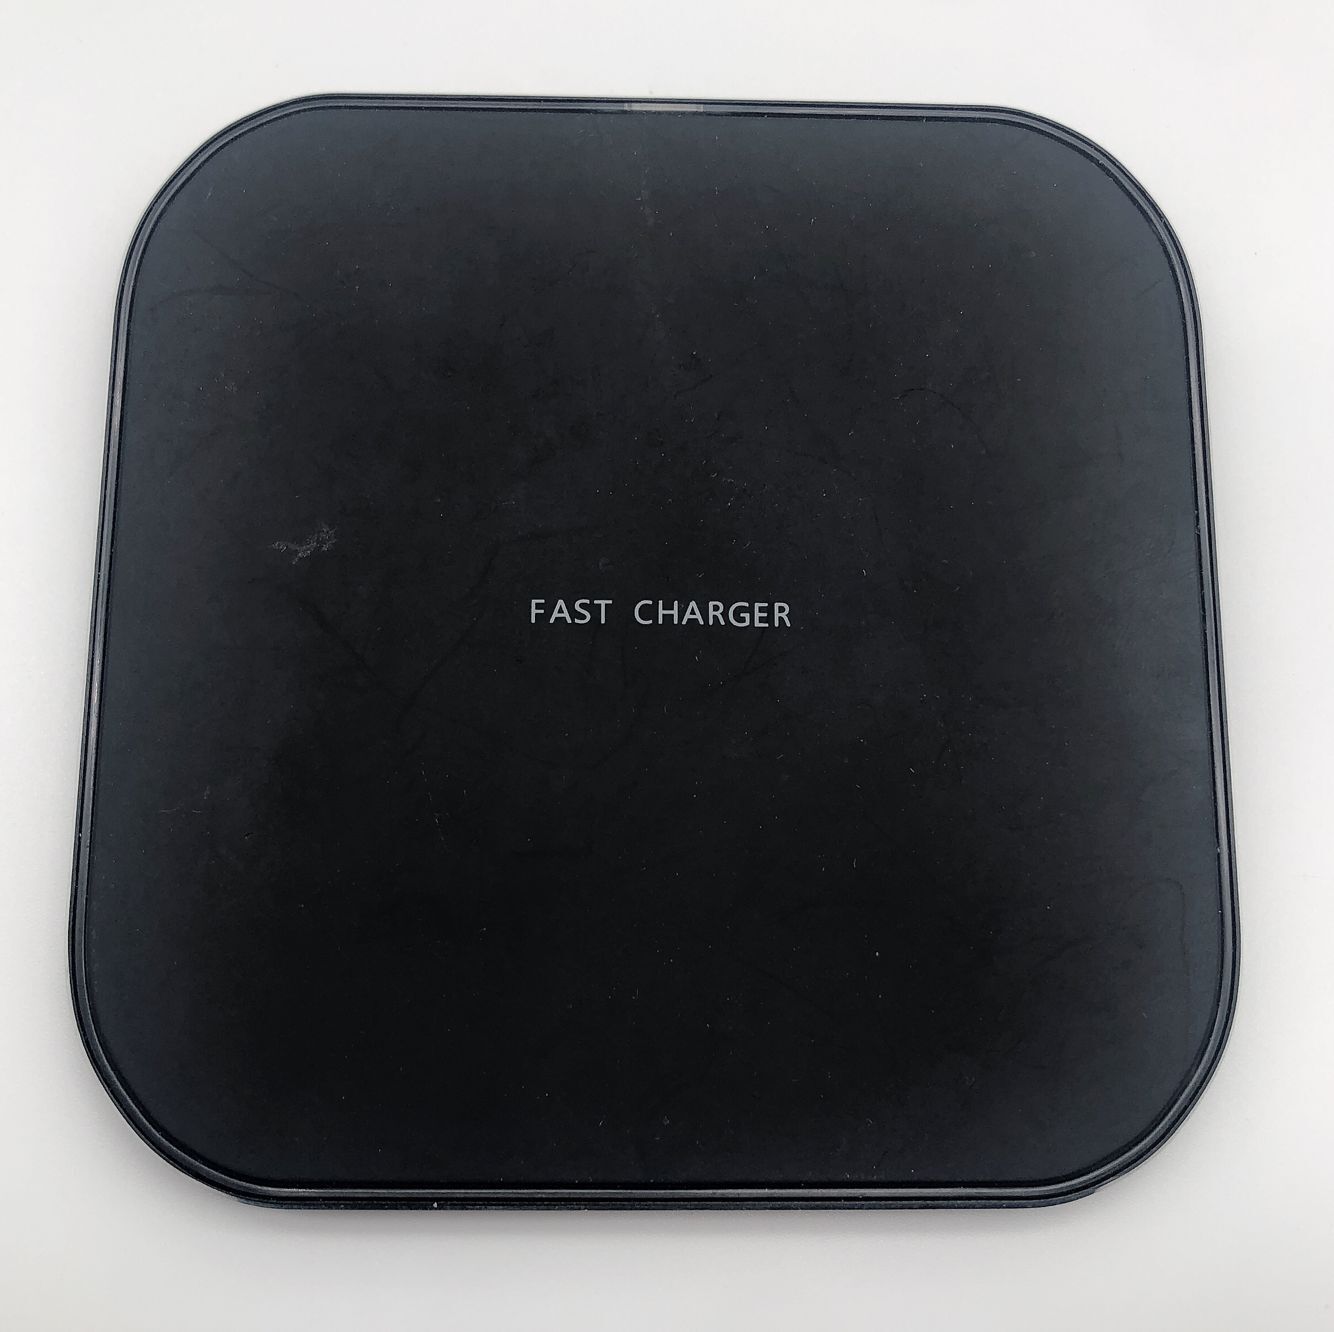 Portable Wireless Fast Charger Pad for iPhone Samsung huawei oppo vivo mi smart phone WC098